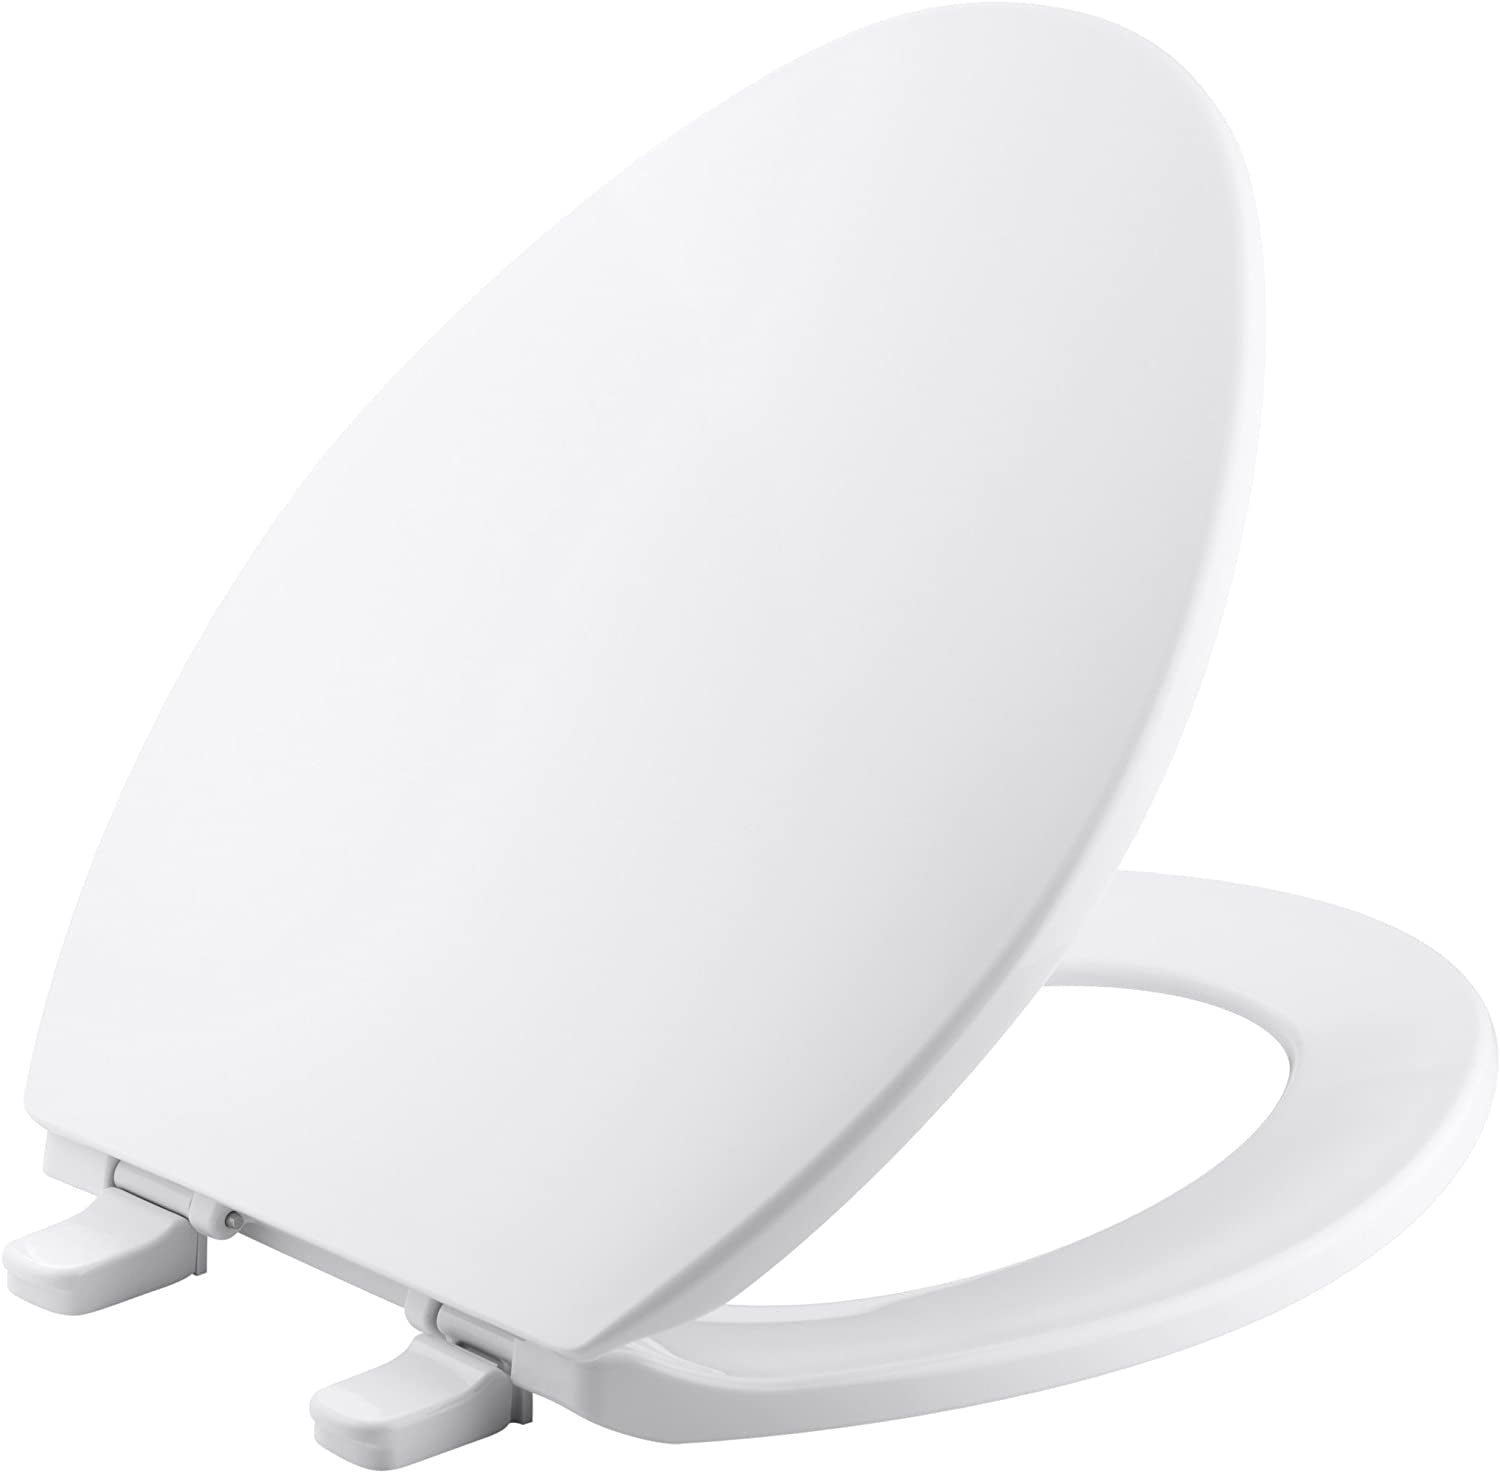 Kohler, Kohler K-4774-0 Brevia Elongated White Toilet Seatwith Quick-Release Hinges and Quick-Attach Hardware for Easy Clean